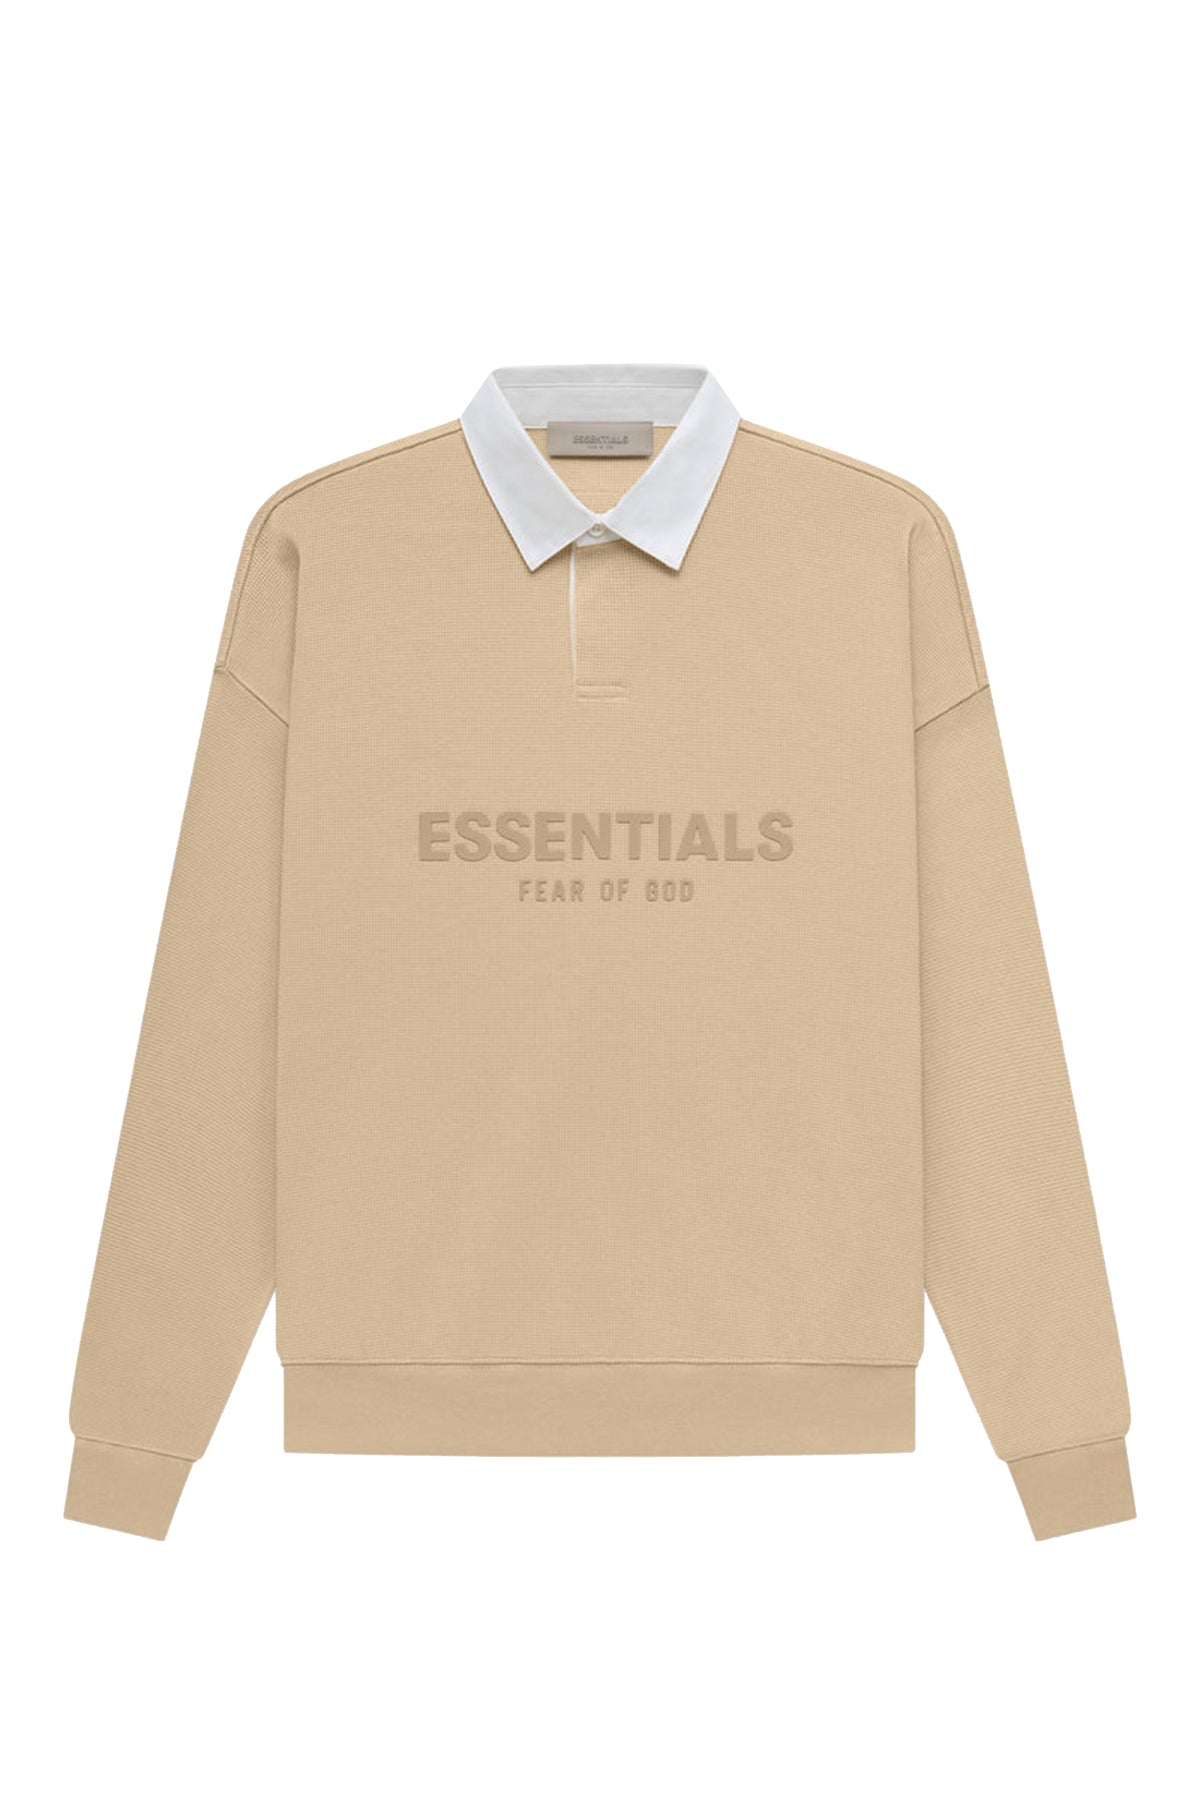 Essentials Henry Rugby XL - ポロシャツ